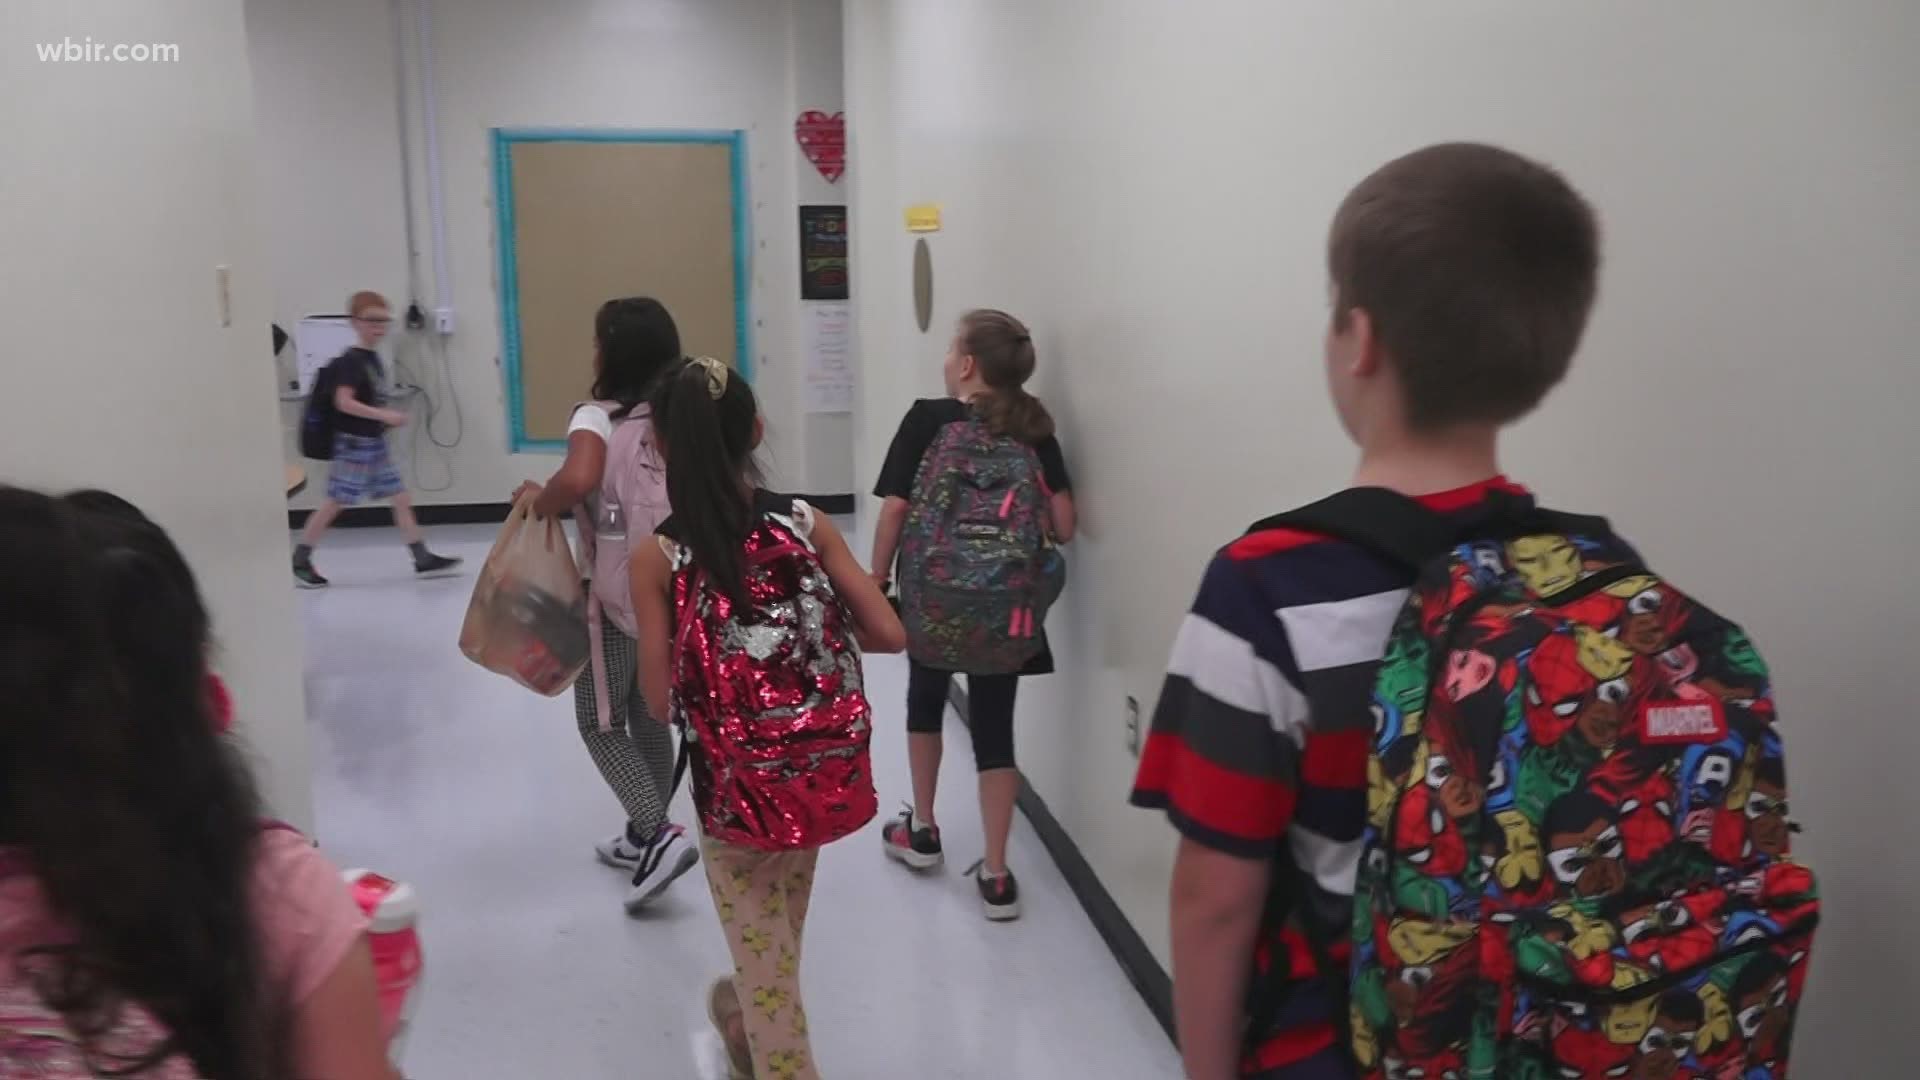 KCHD said it agrees with CDC guidelines about wearing masks in schools.